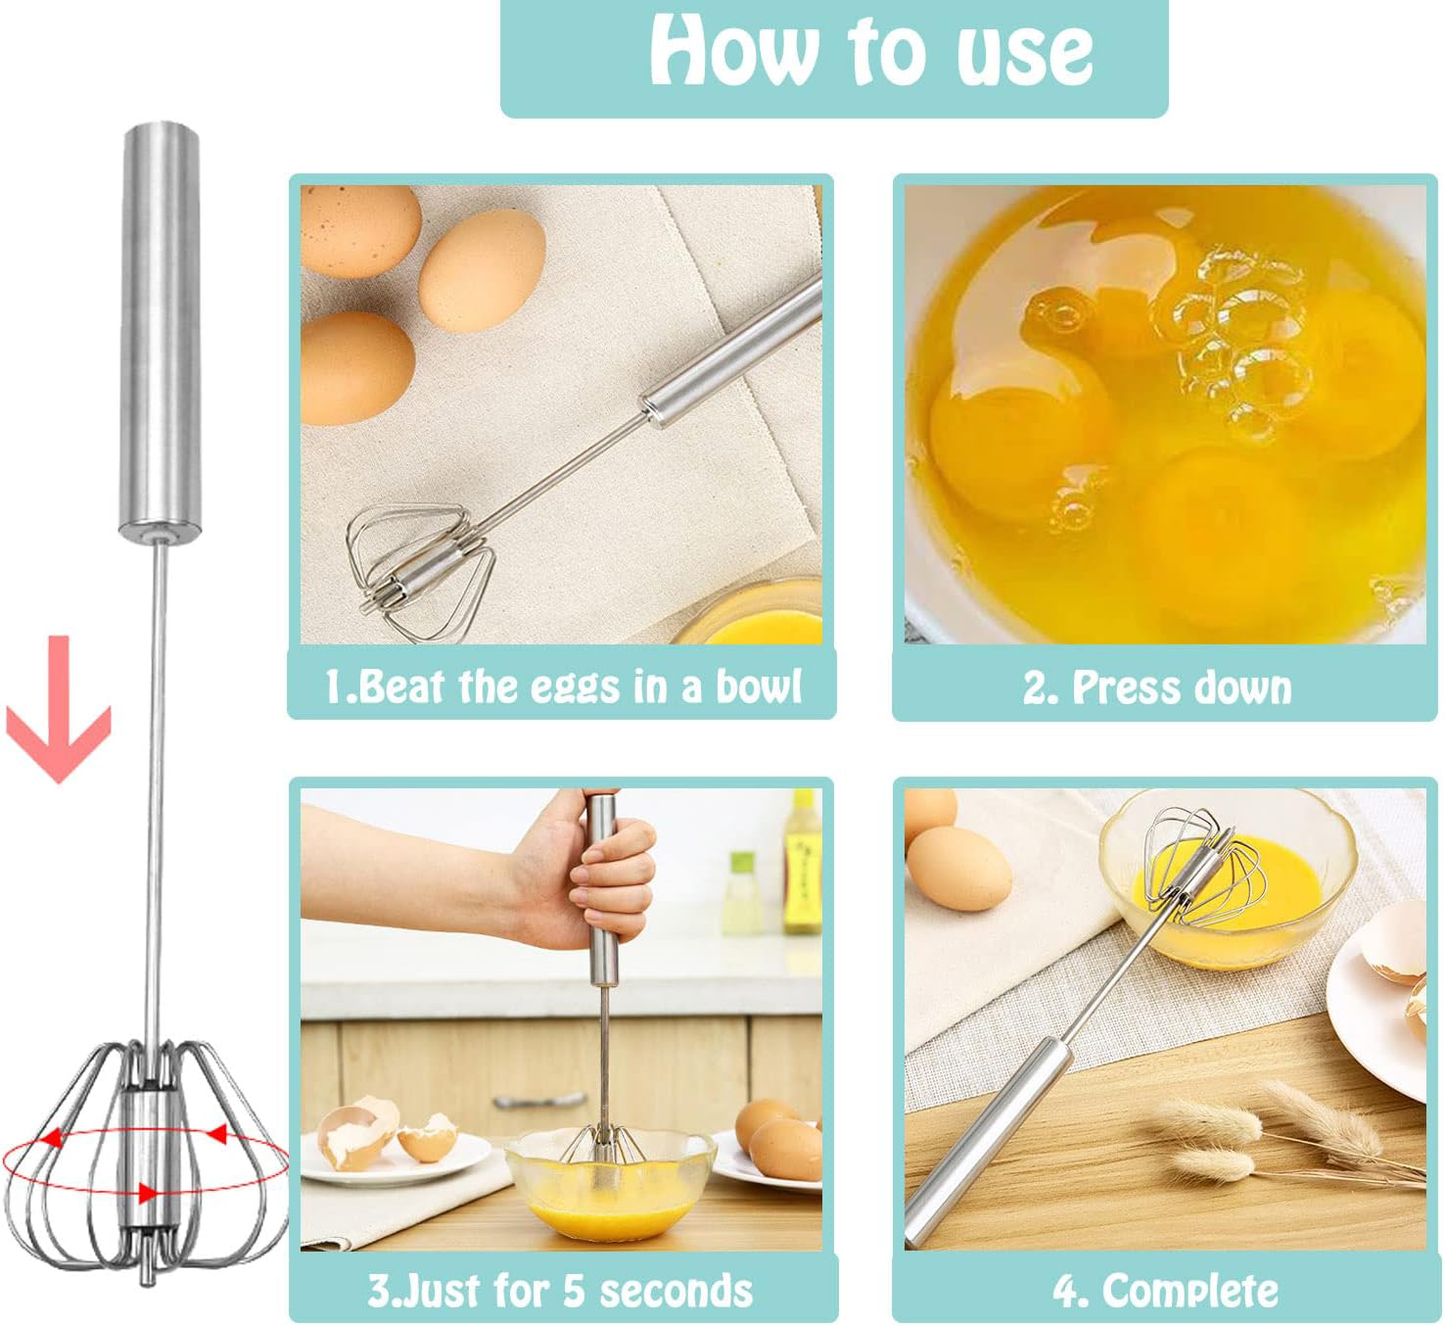 KD Stainless Steel Semi-Automatic Egg Beater